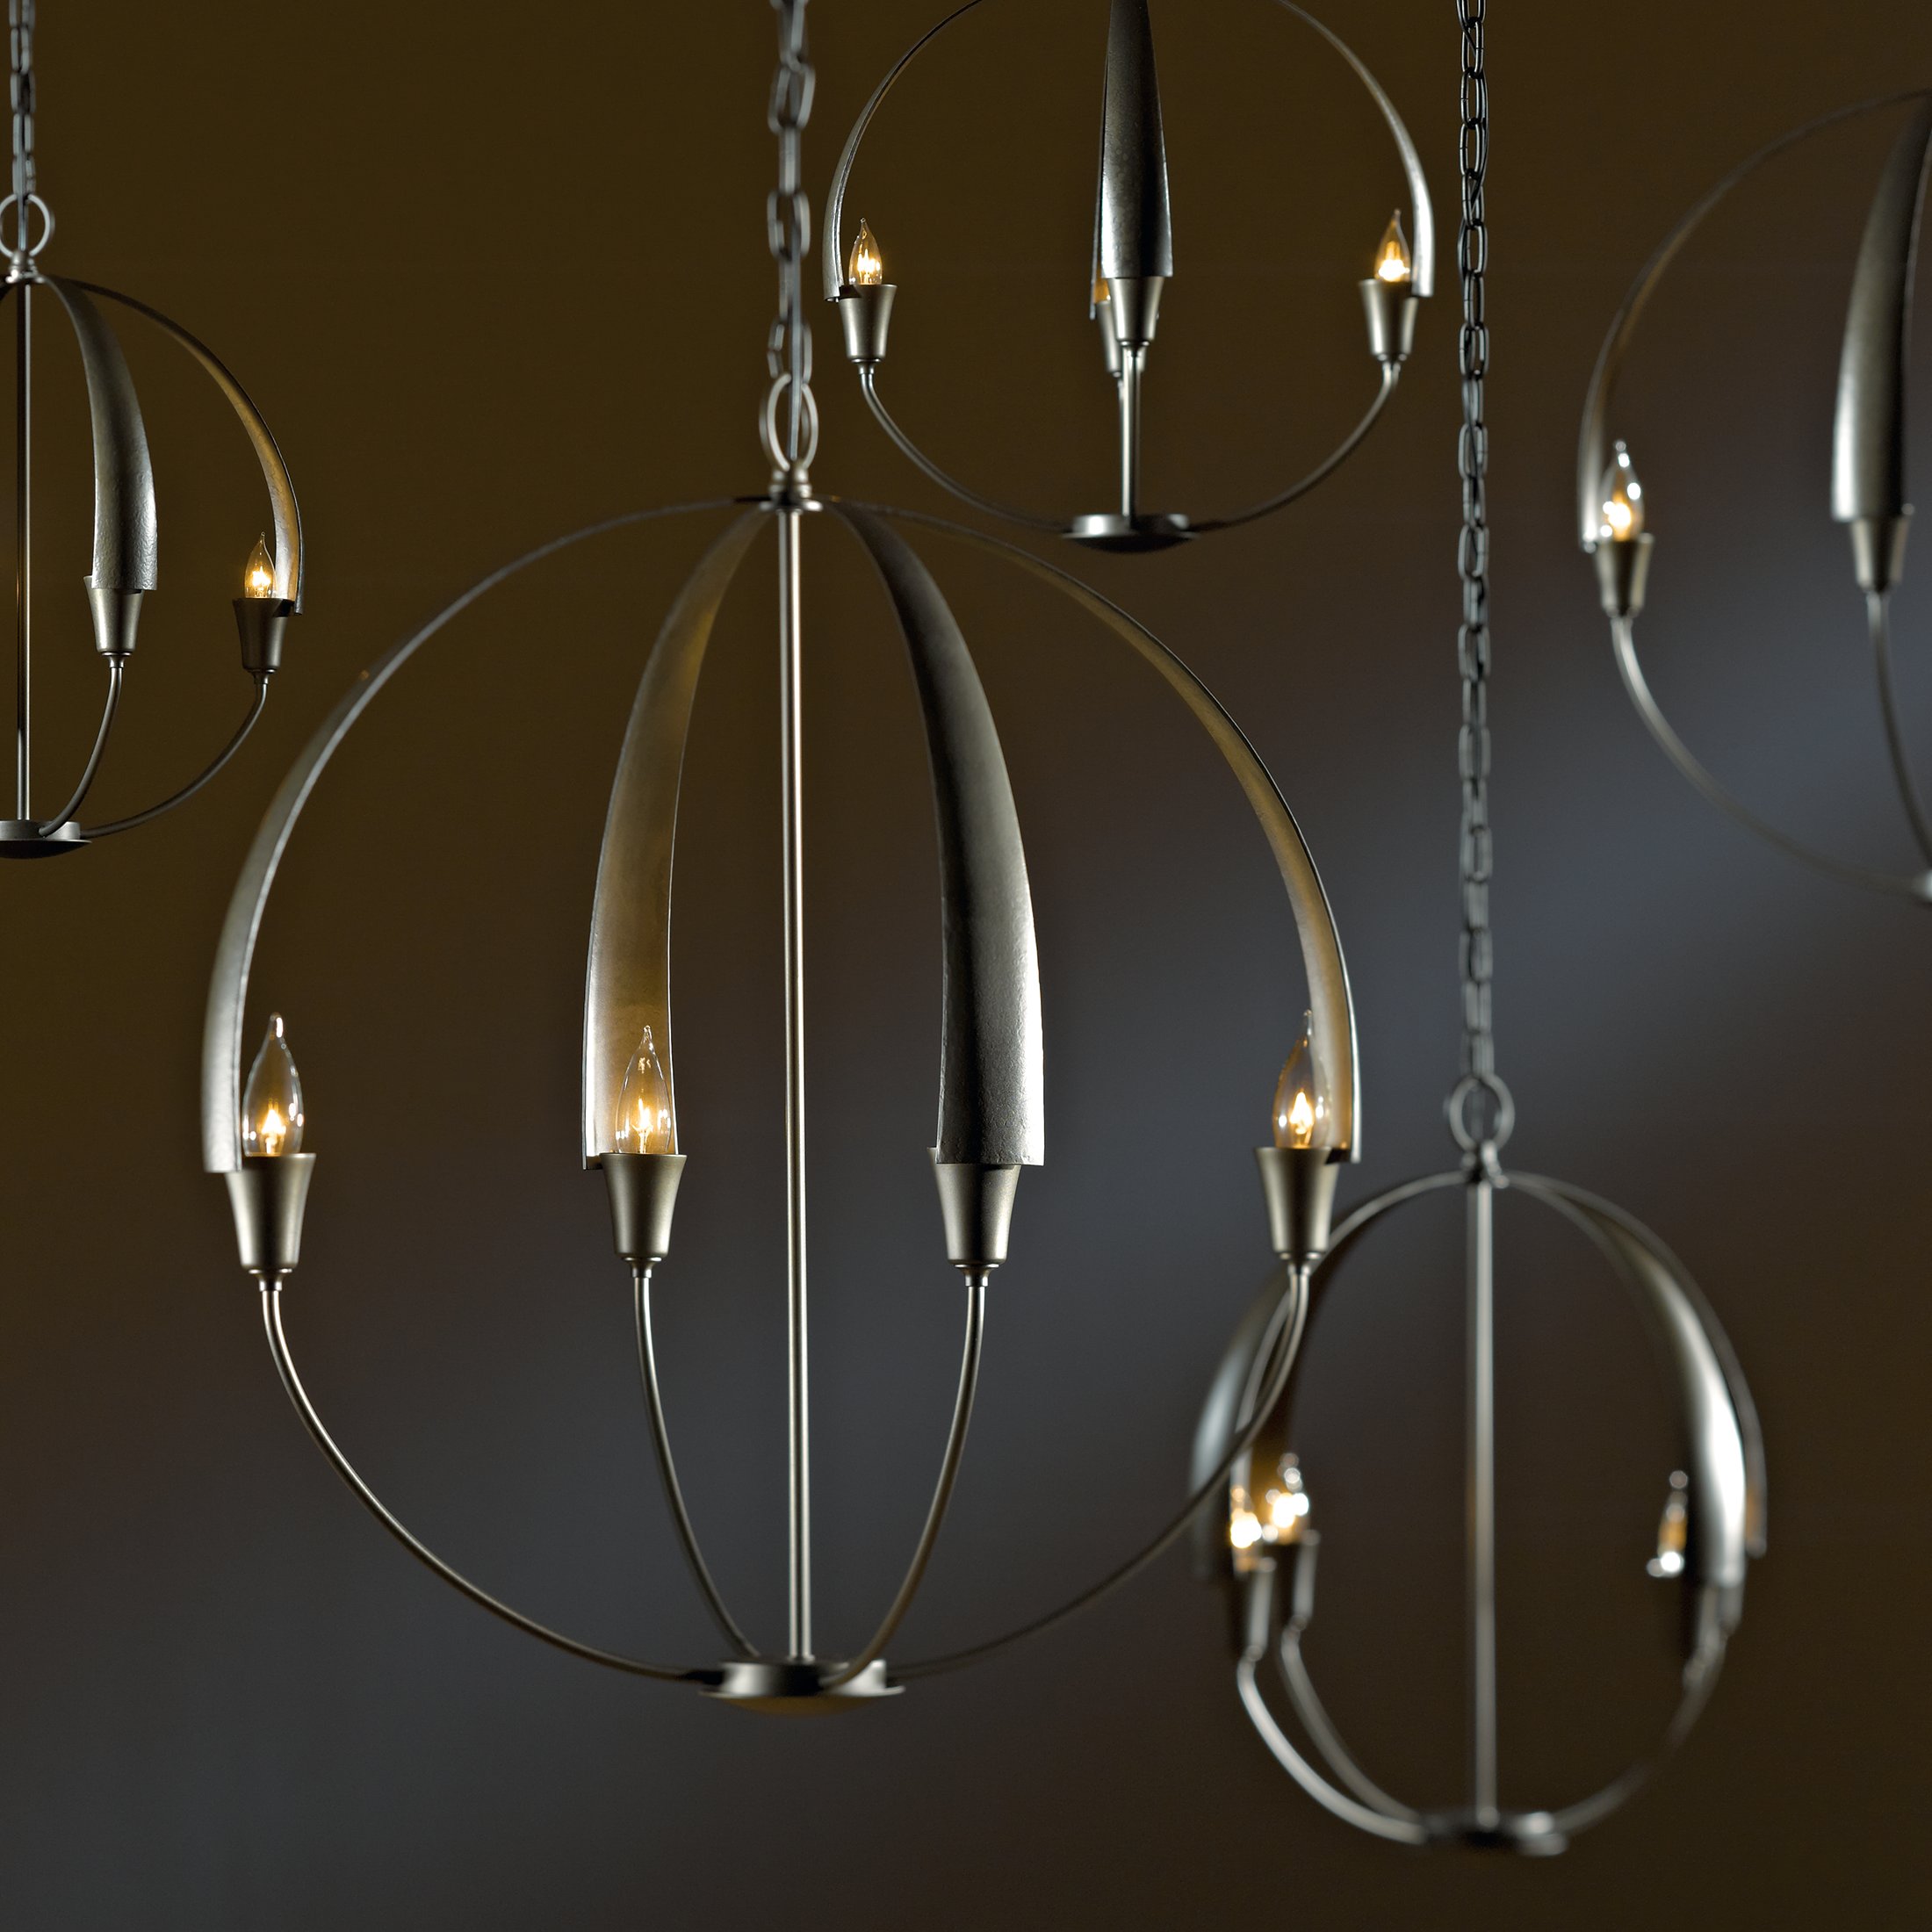 Reed Large Chandelier - TOB5010